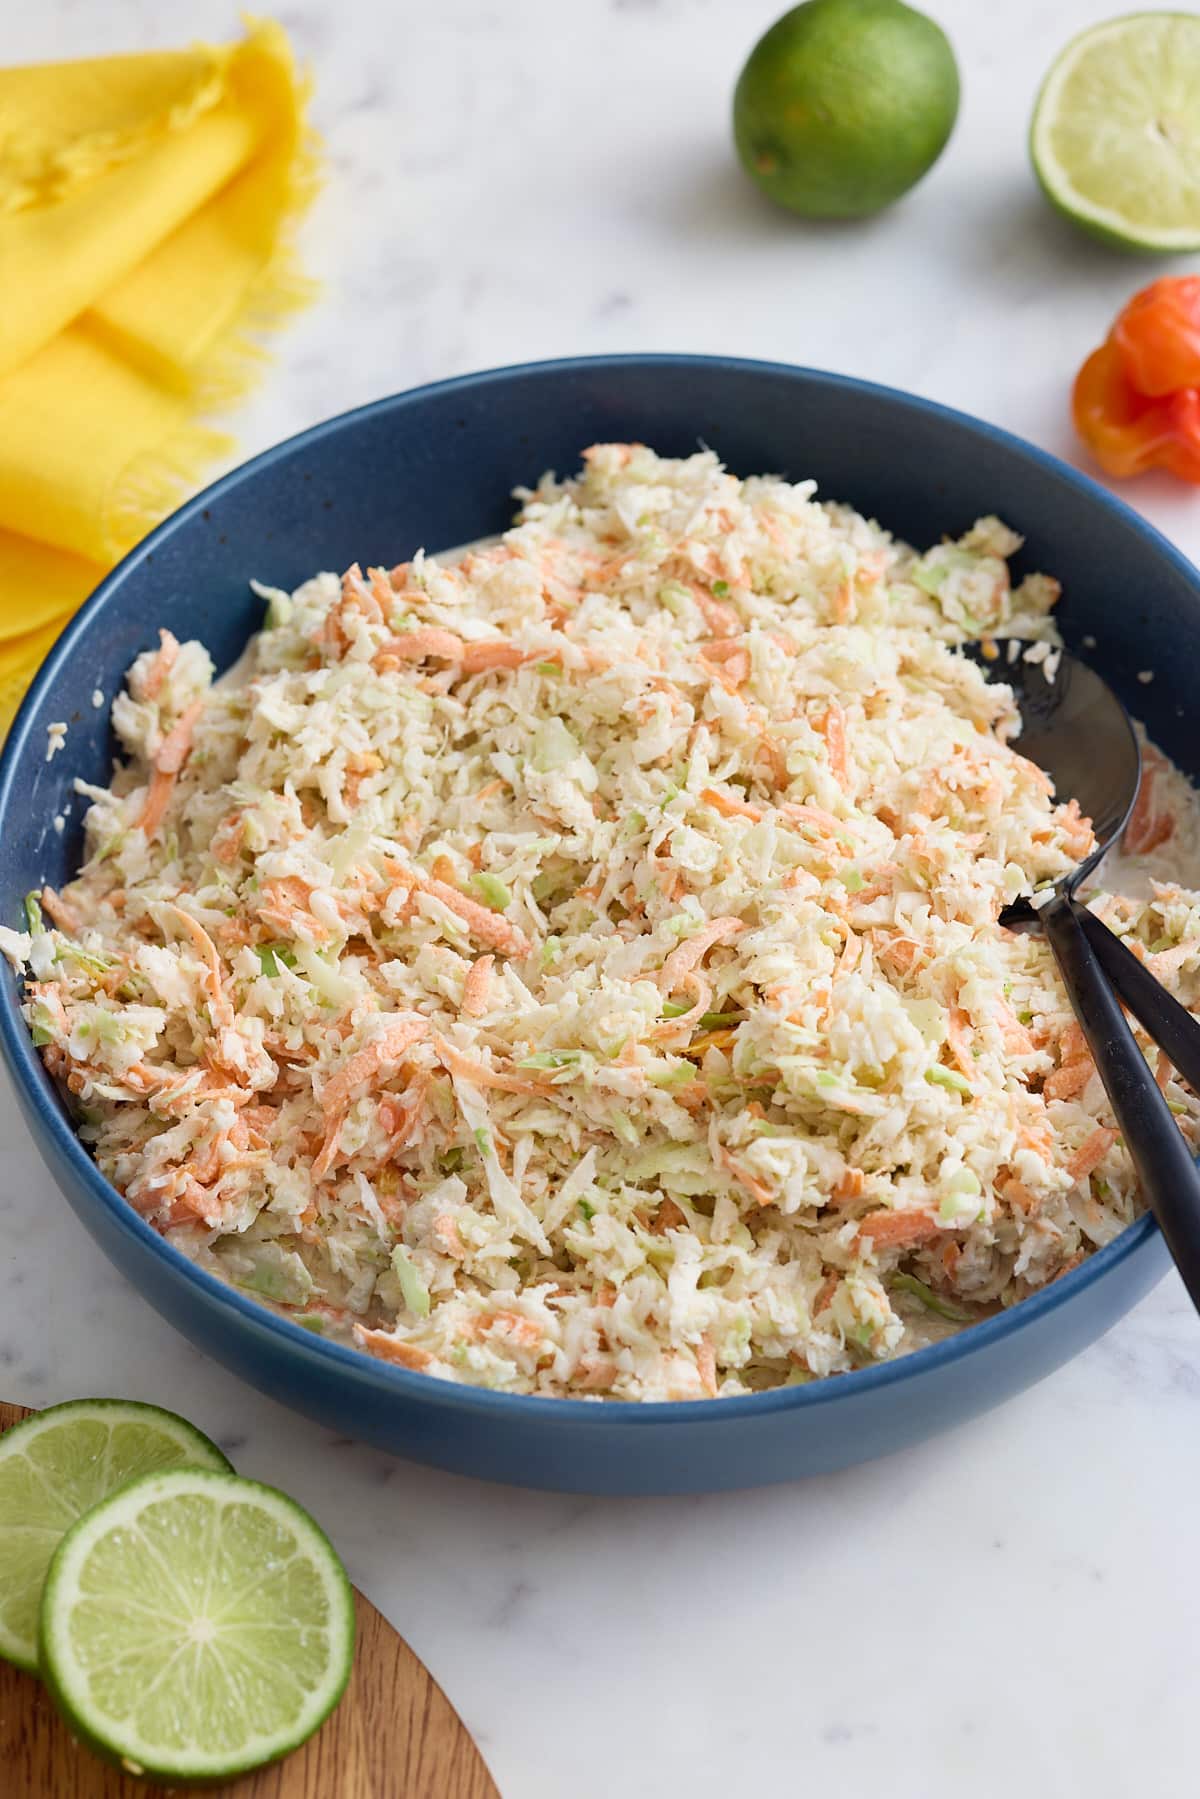 A bowl of Jamaican coleslaw with serving spoons.